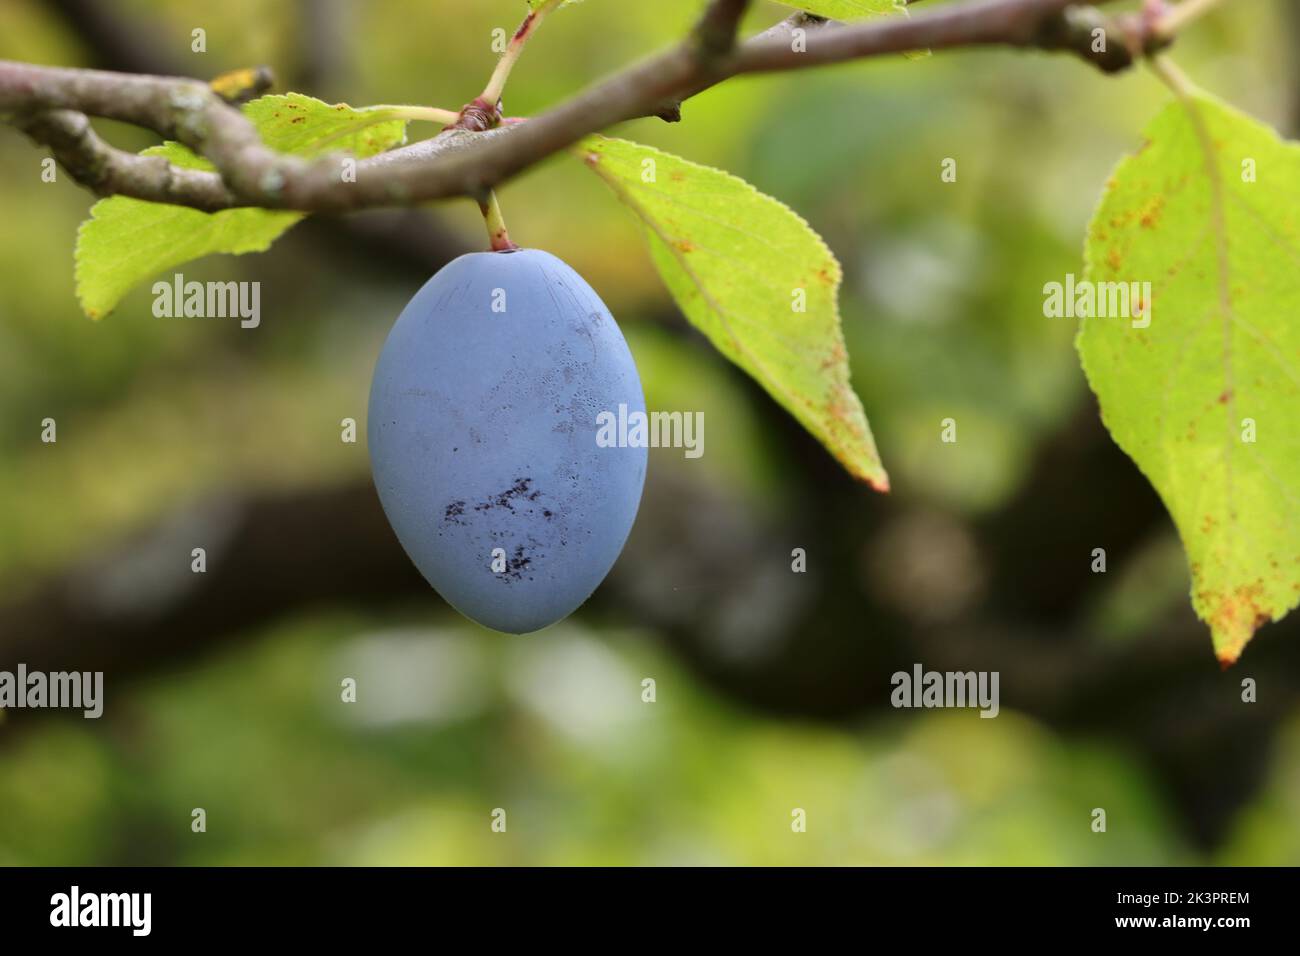 a single plum hangs ready for harvest on a branch, side view, natural blurred background Stock Photo